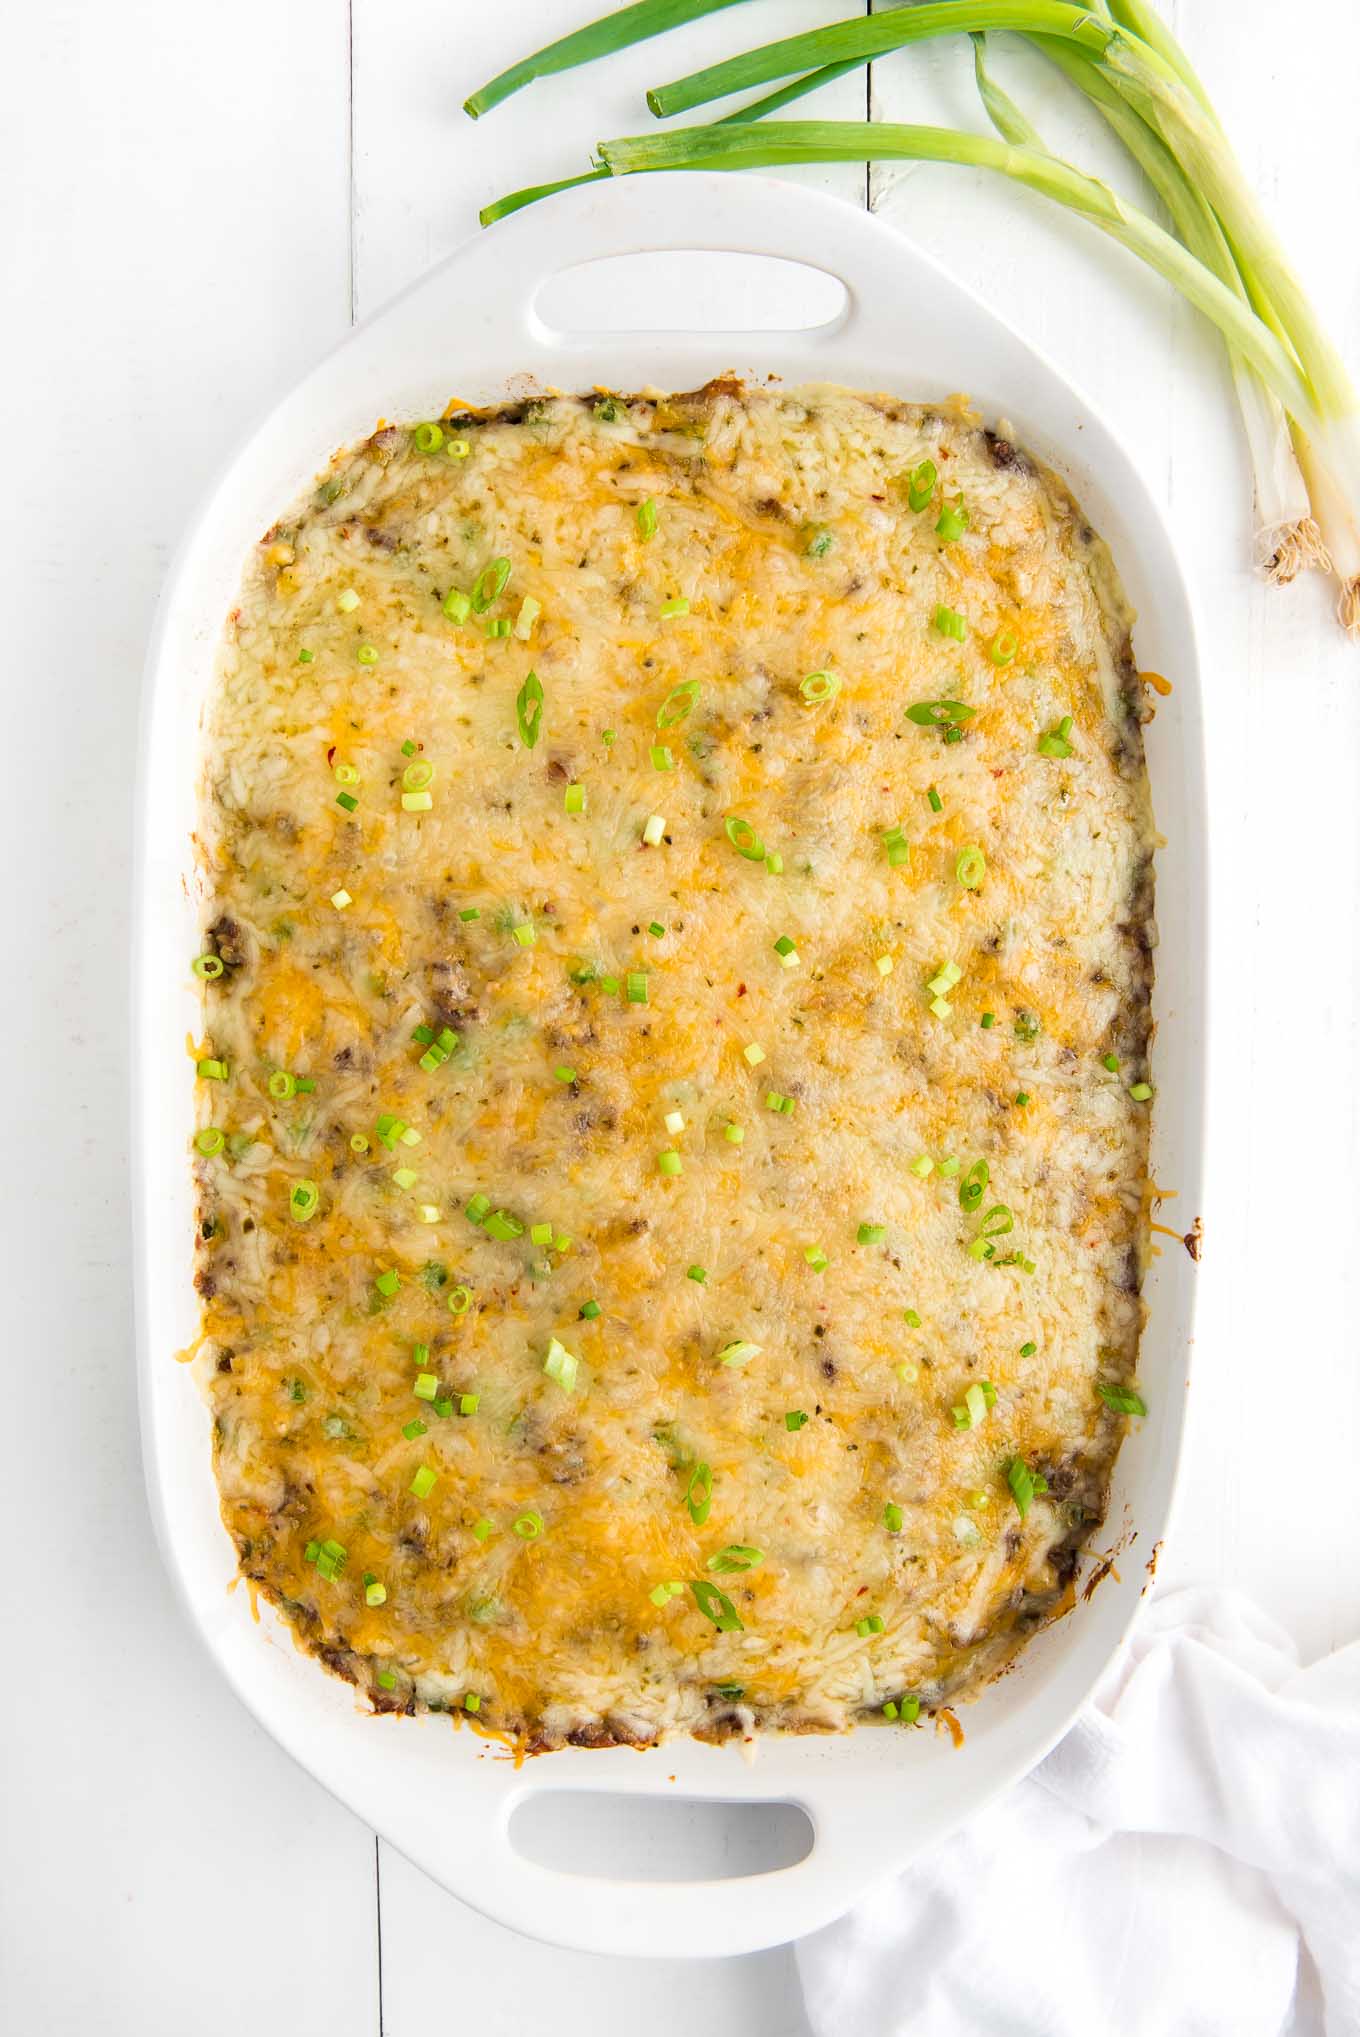 A baked hash brown casserole with hamburger topped with cheese and garnished with green onions on the table in a white rectangle dish.